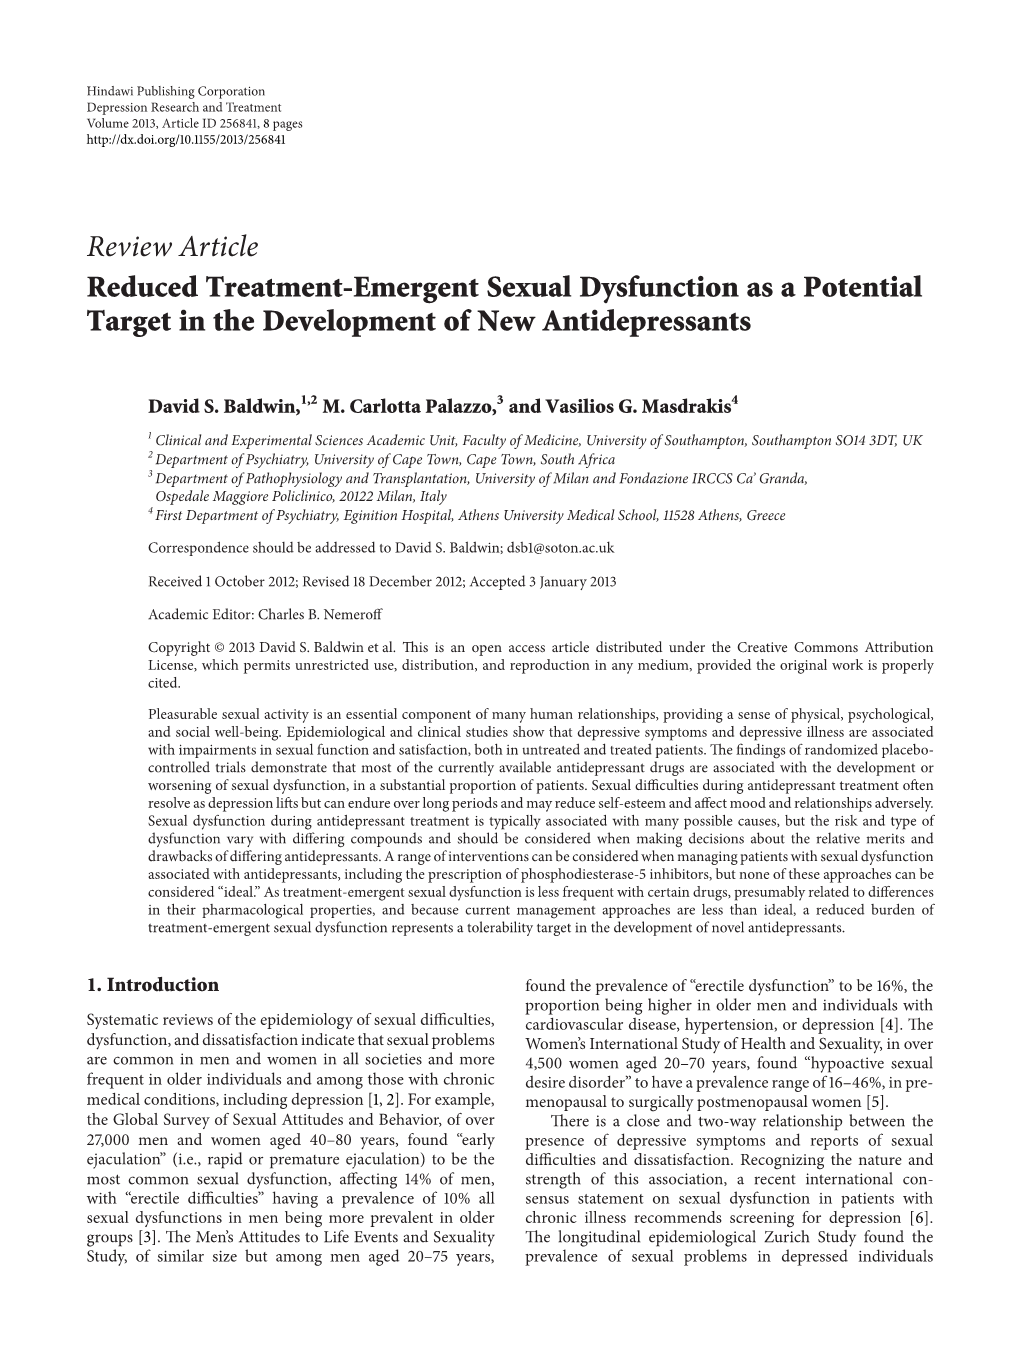 Reduced Treatment-Emergent Sexual Dysfunction As a Potential Target in the Development of New Antidepressants